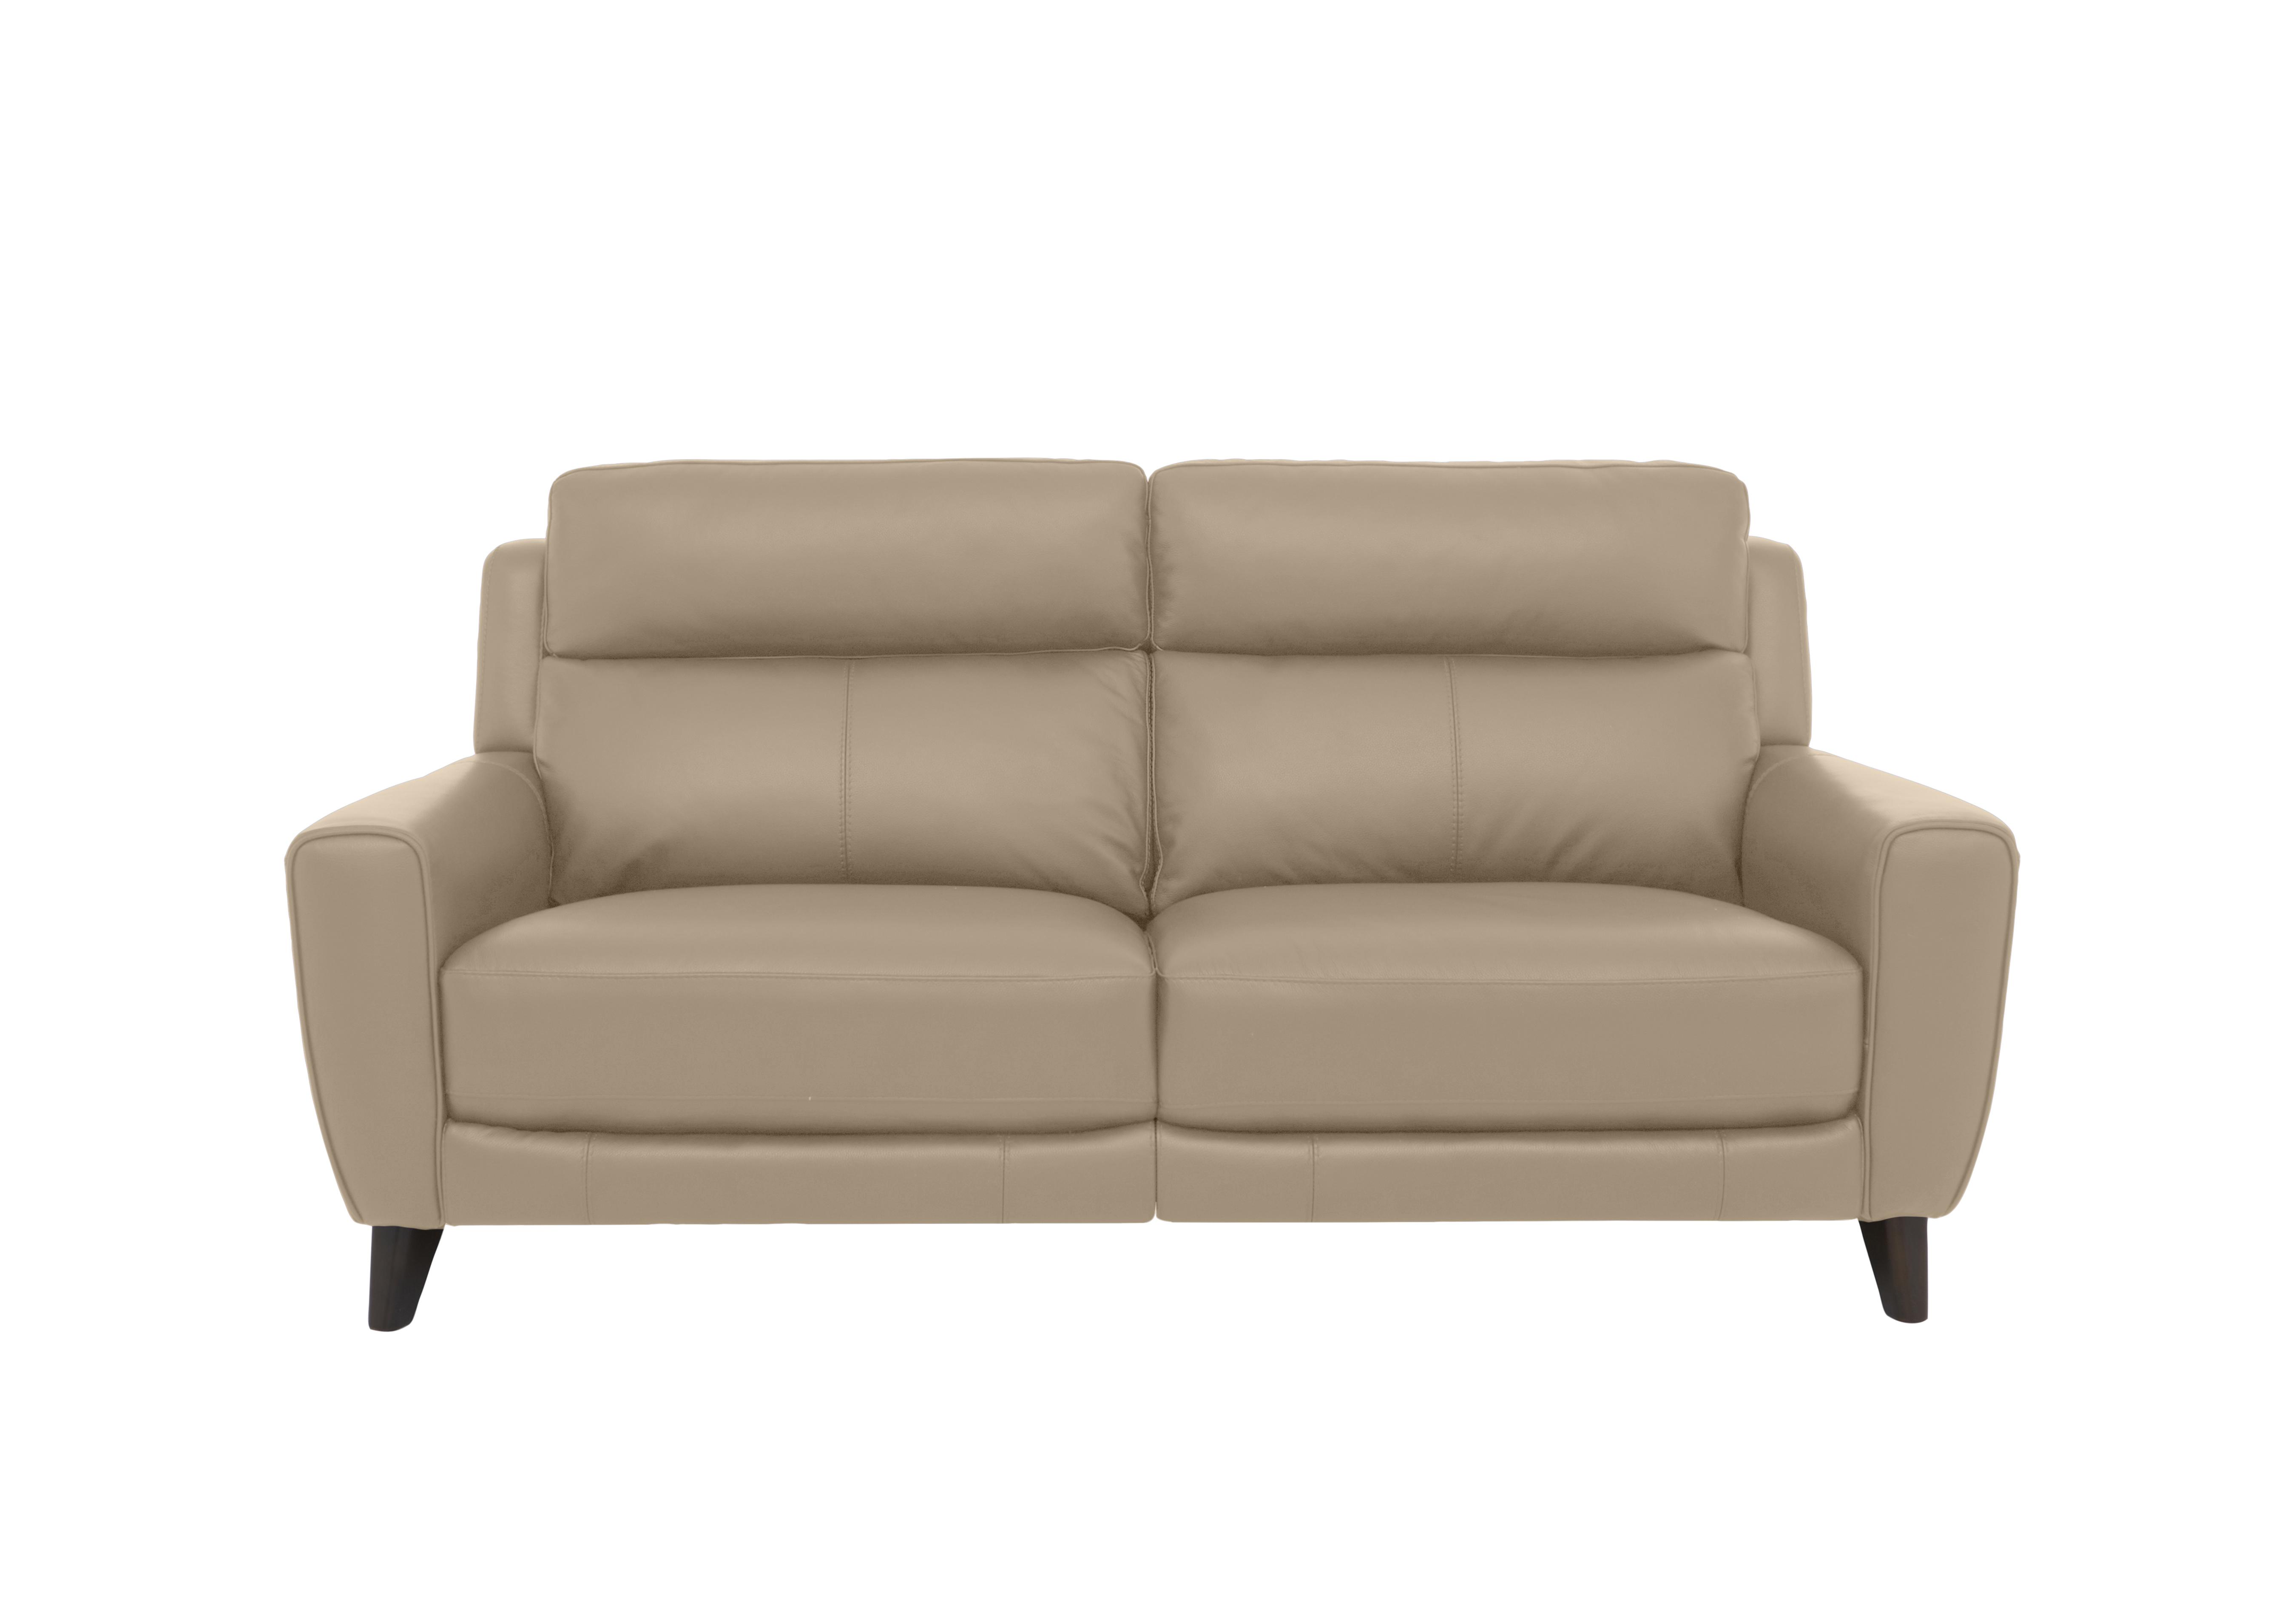 Zen 3 Seater Leather Sofa in Bx-039c Pebble on Furniture Village